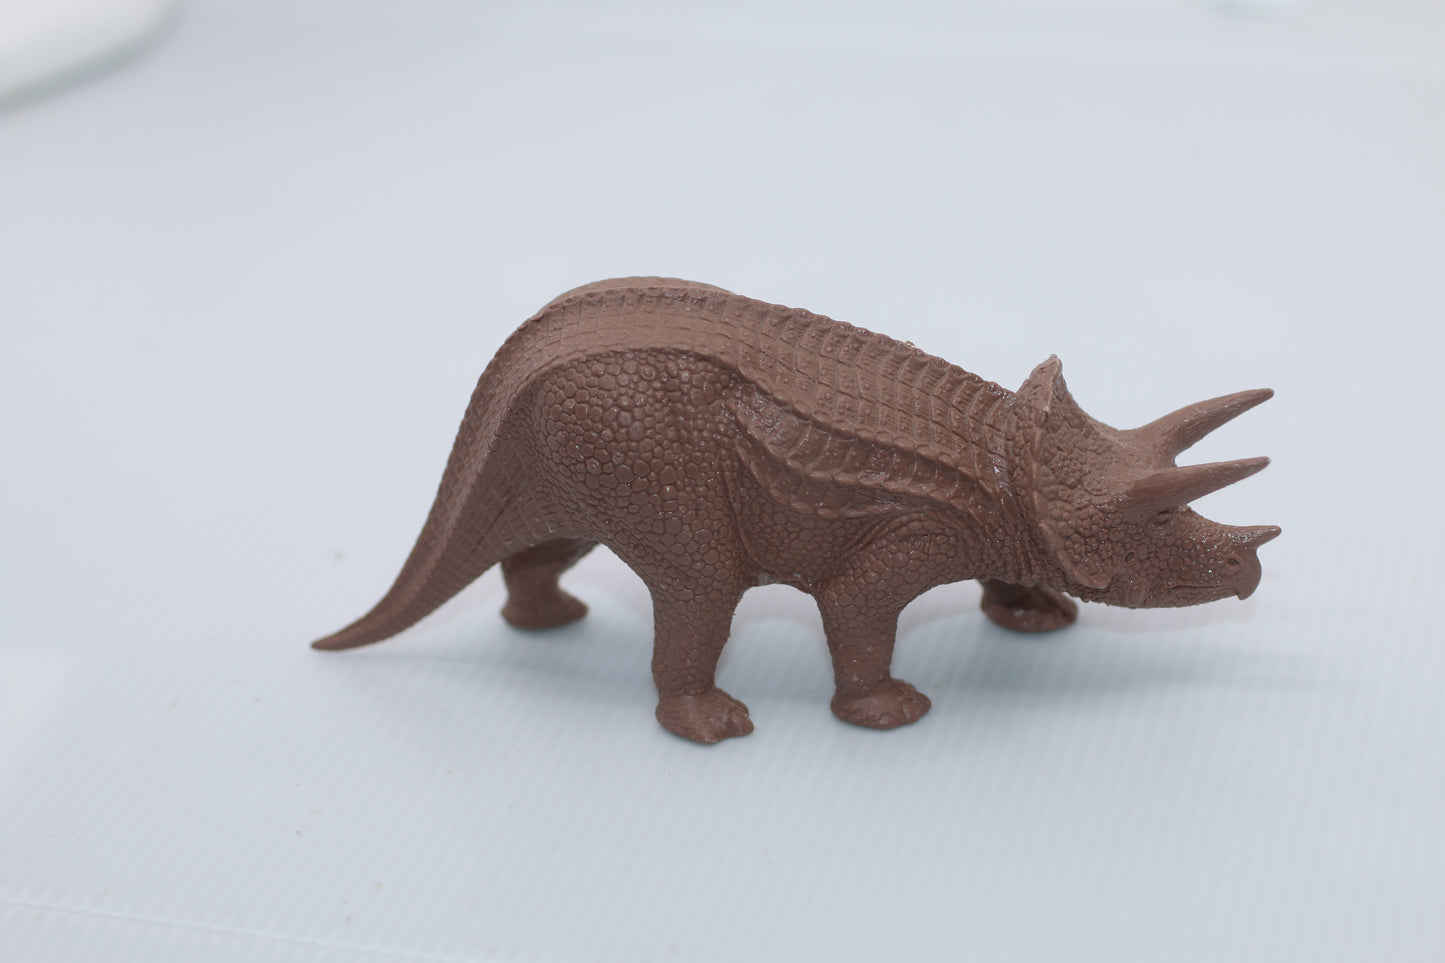 Vintage Natural History Museum Triceratops Dinosaur Toy Model by Invicta 1975